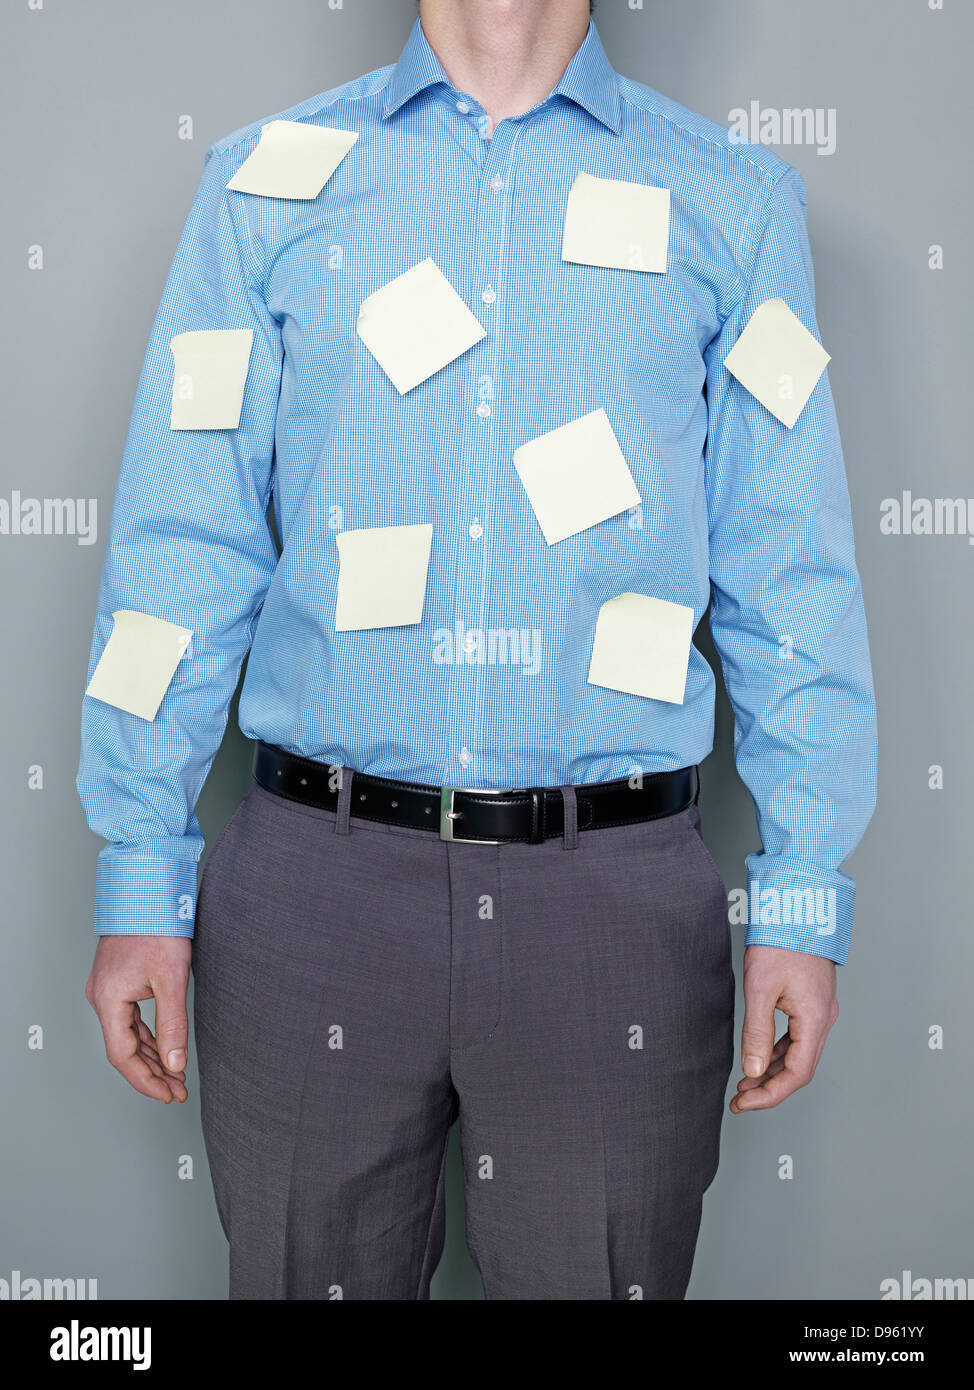 Businessman with adhesive note shirt Stock Photo